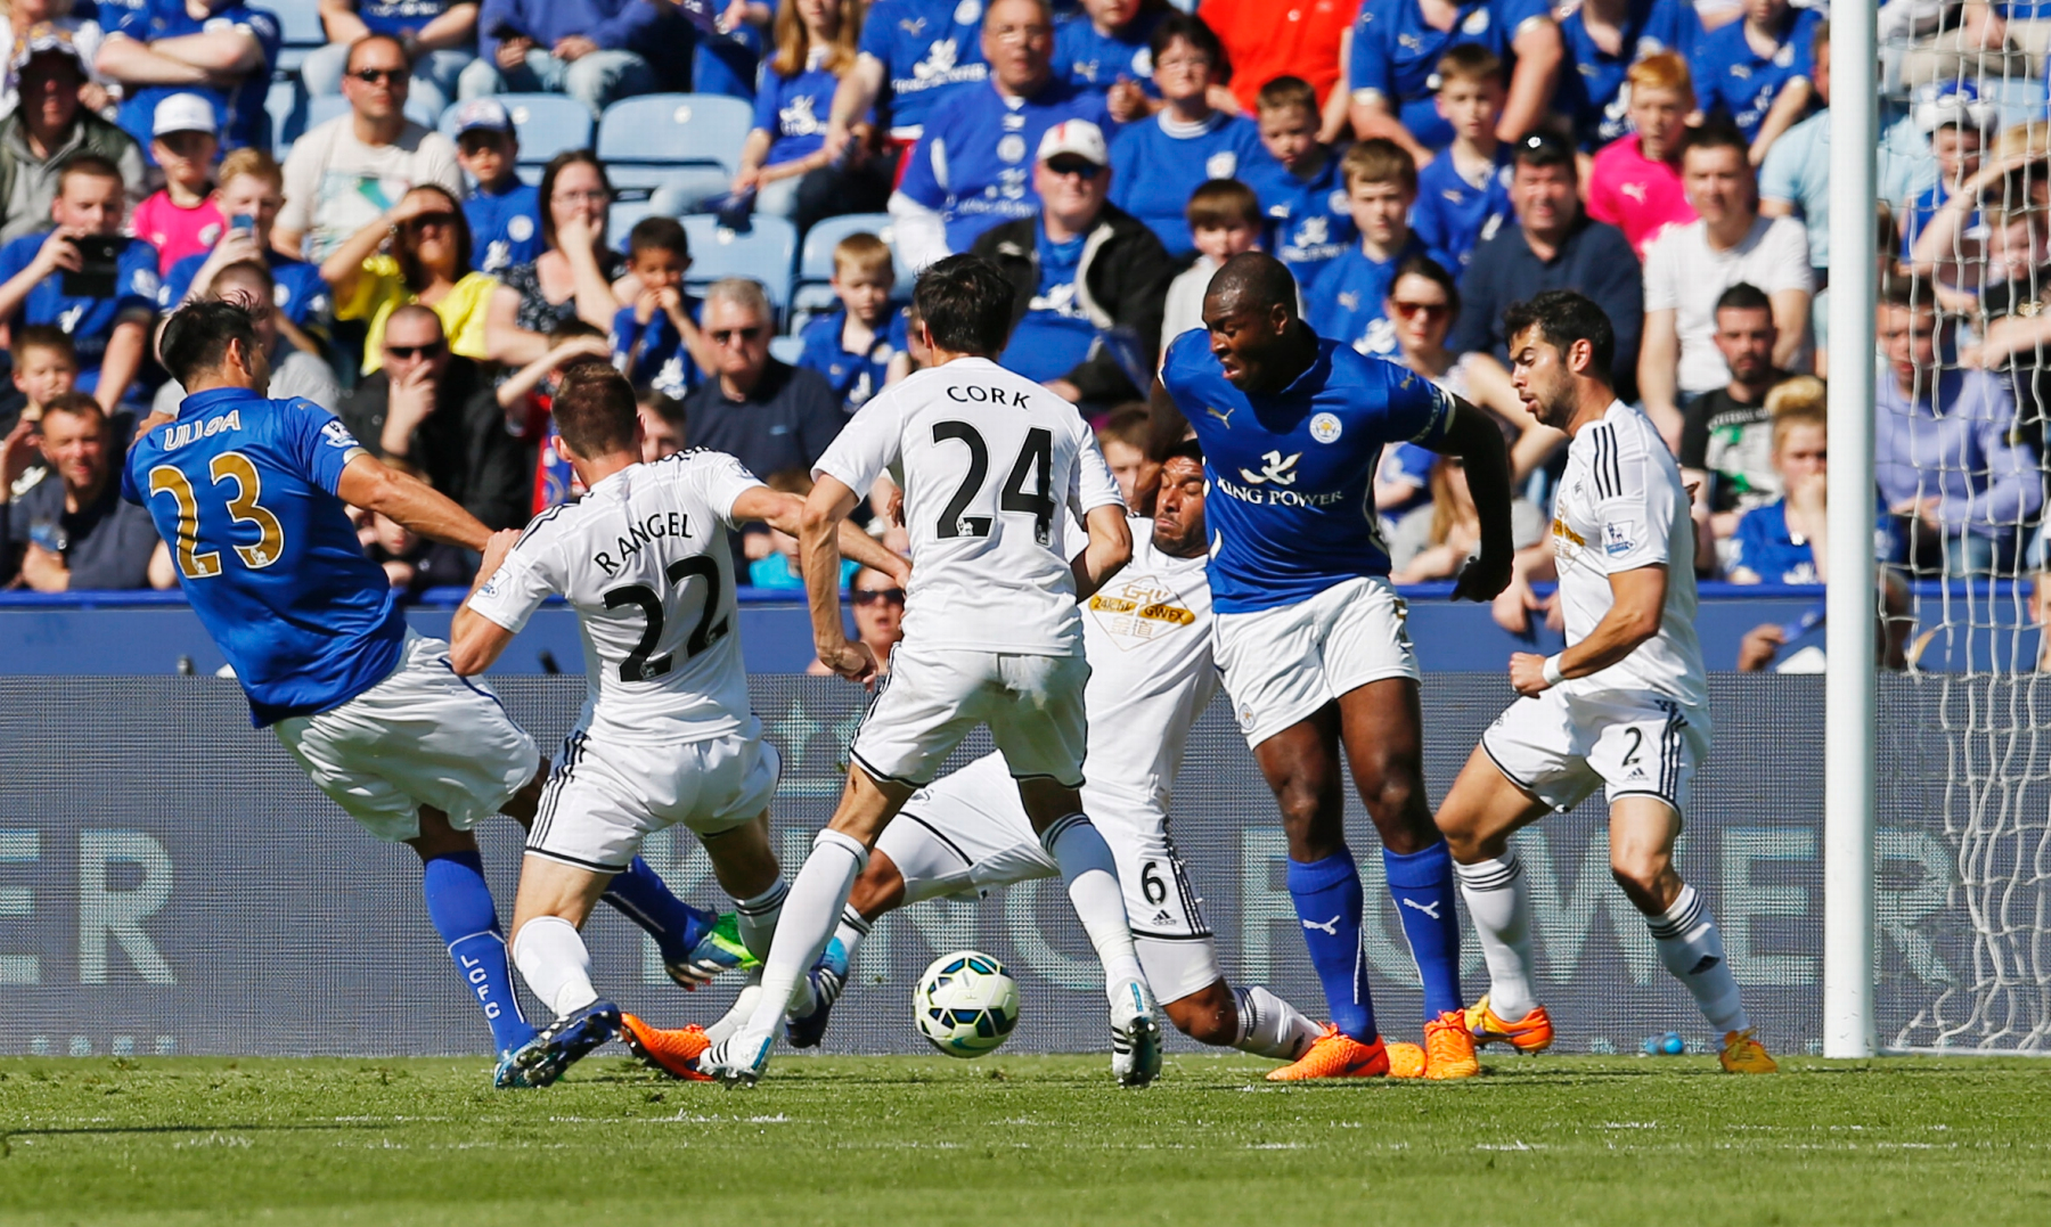 Can Leicester register their first win of the season against Swansea?